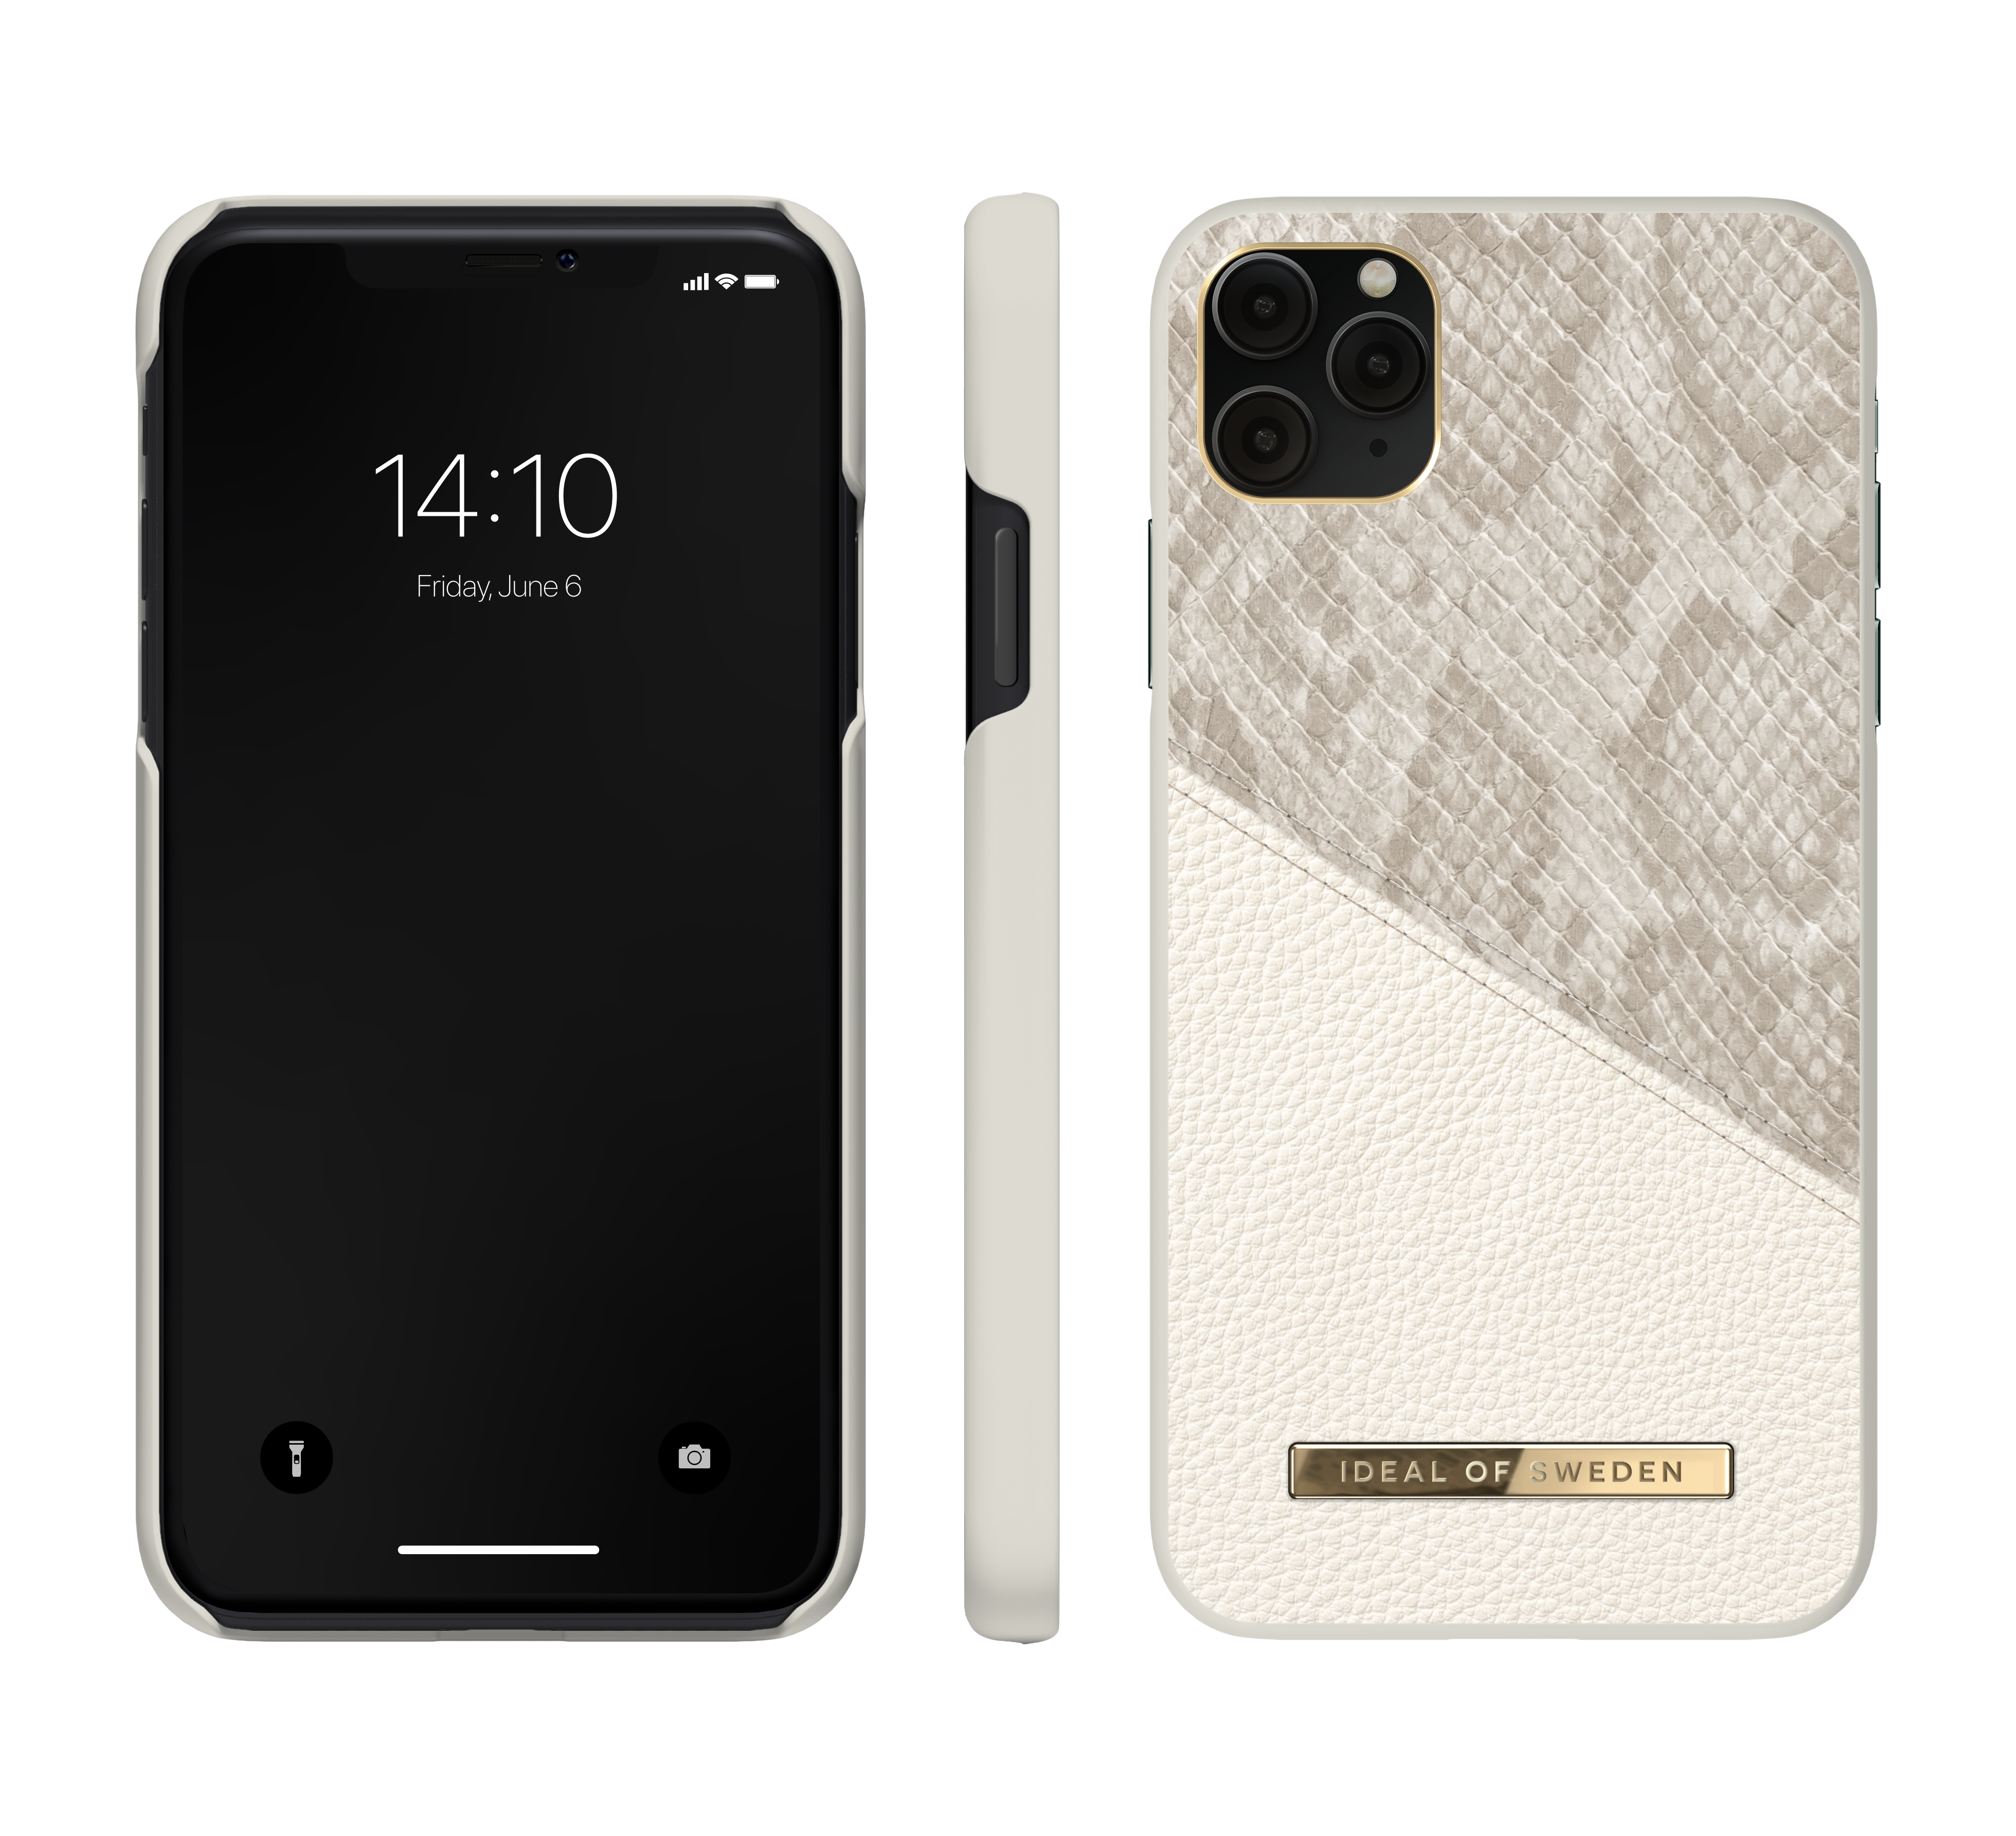 IDEAL OF SWEDEN IDACSS20-I1961-200, Backcover, Pearl Apple, Python iPhone iPhone 11, XR